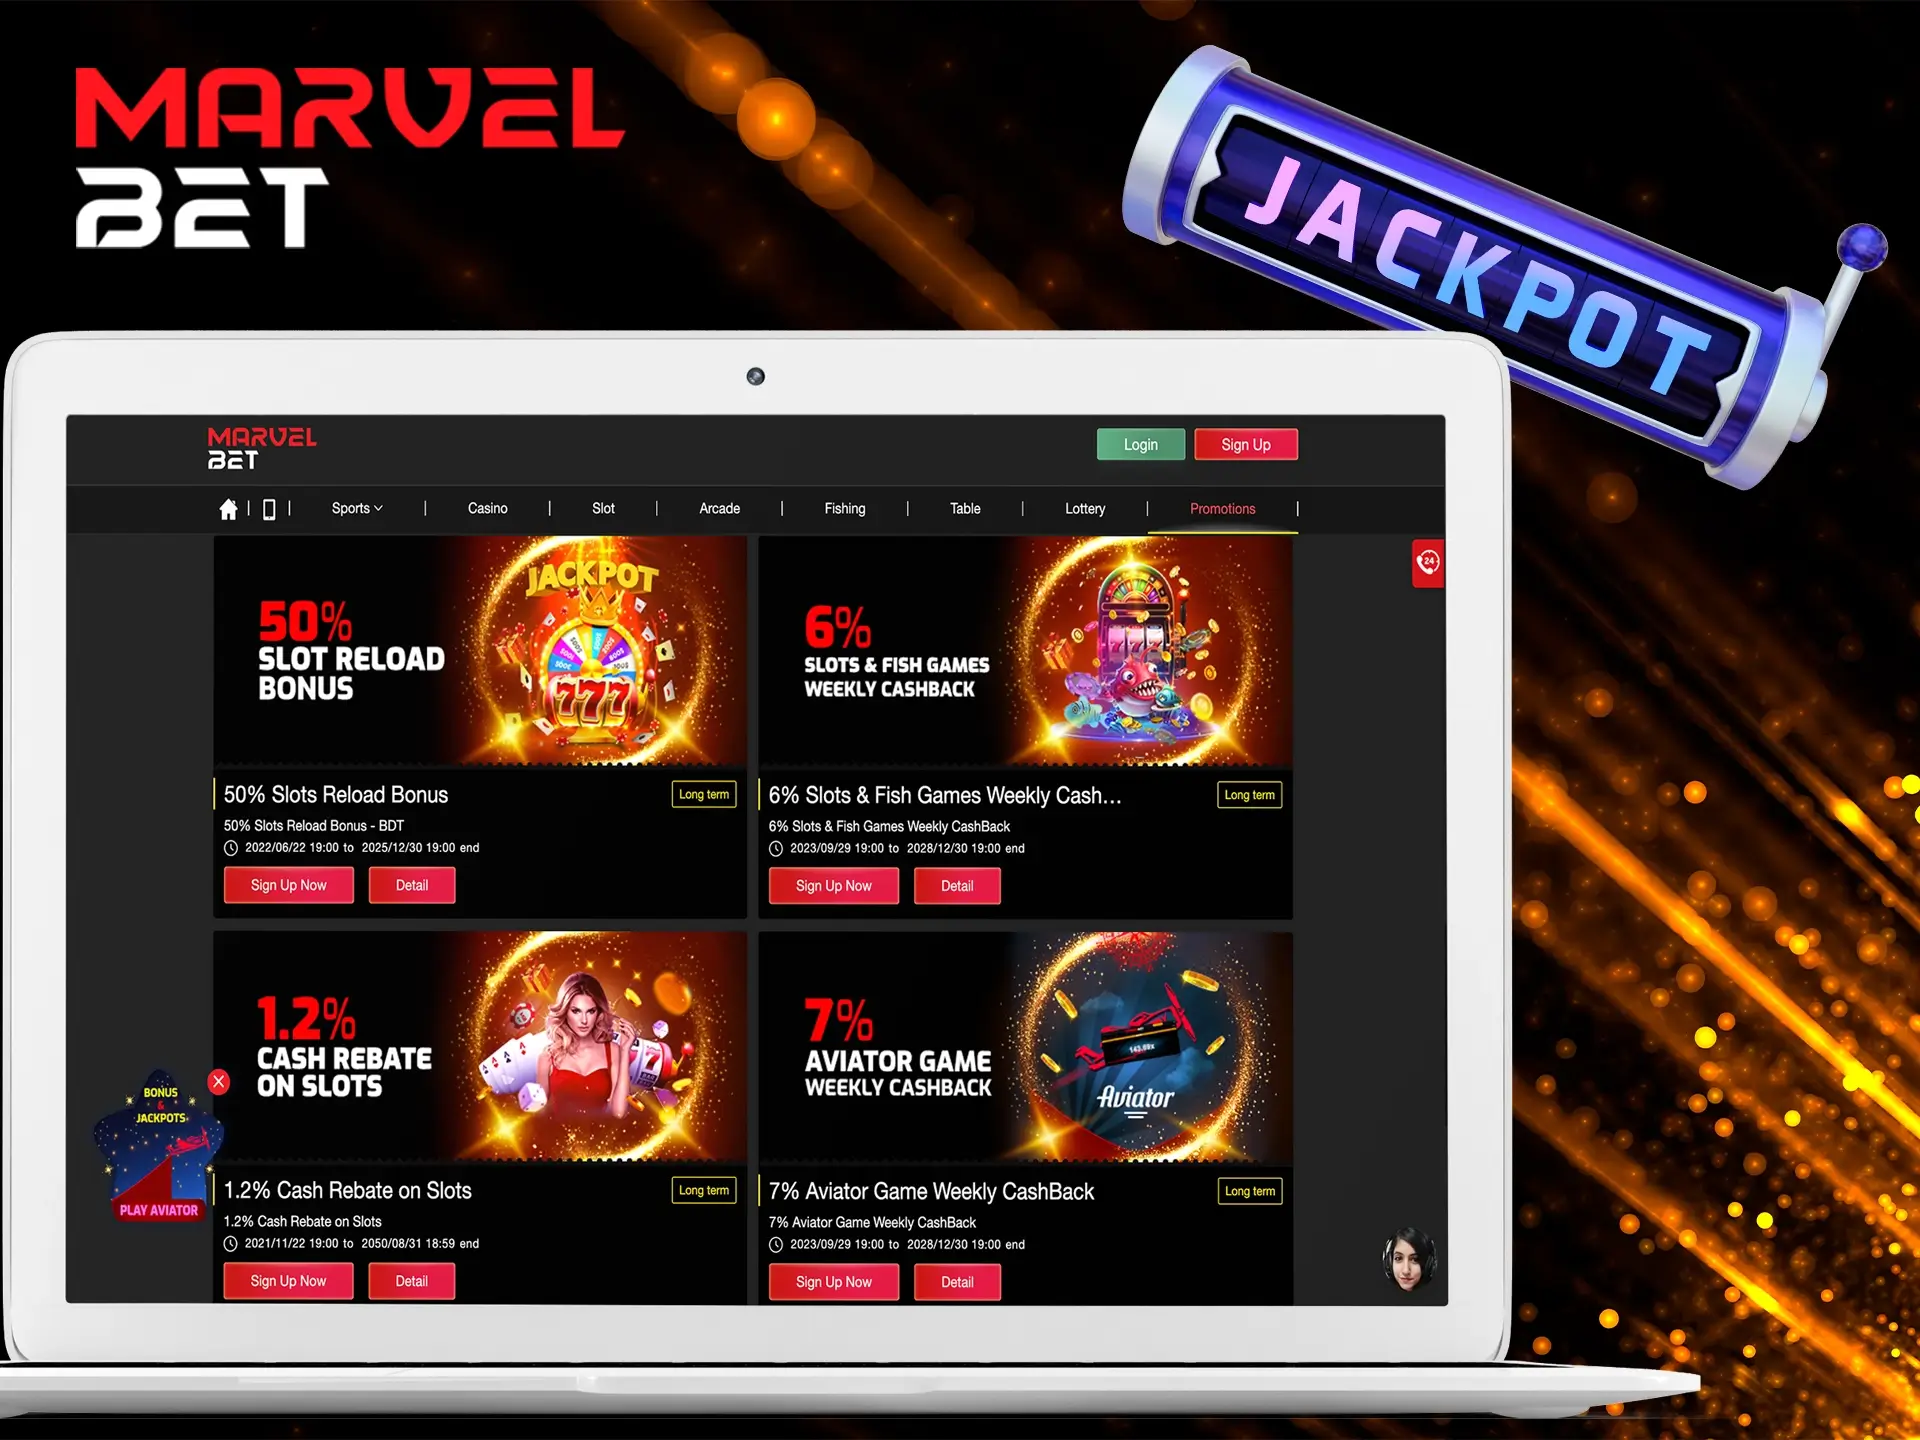 Marvelbet's wide range of promotions will always be able to favour players of all levels.